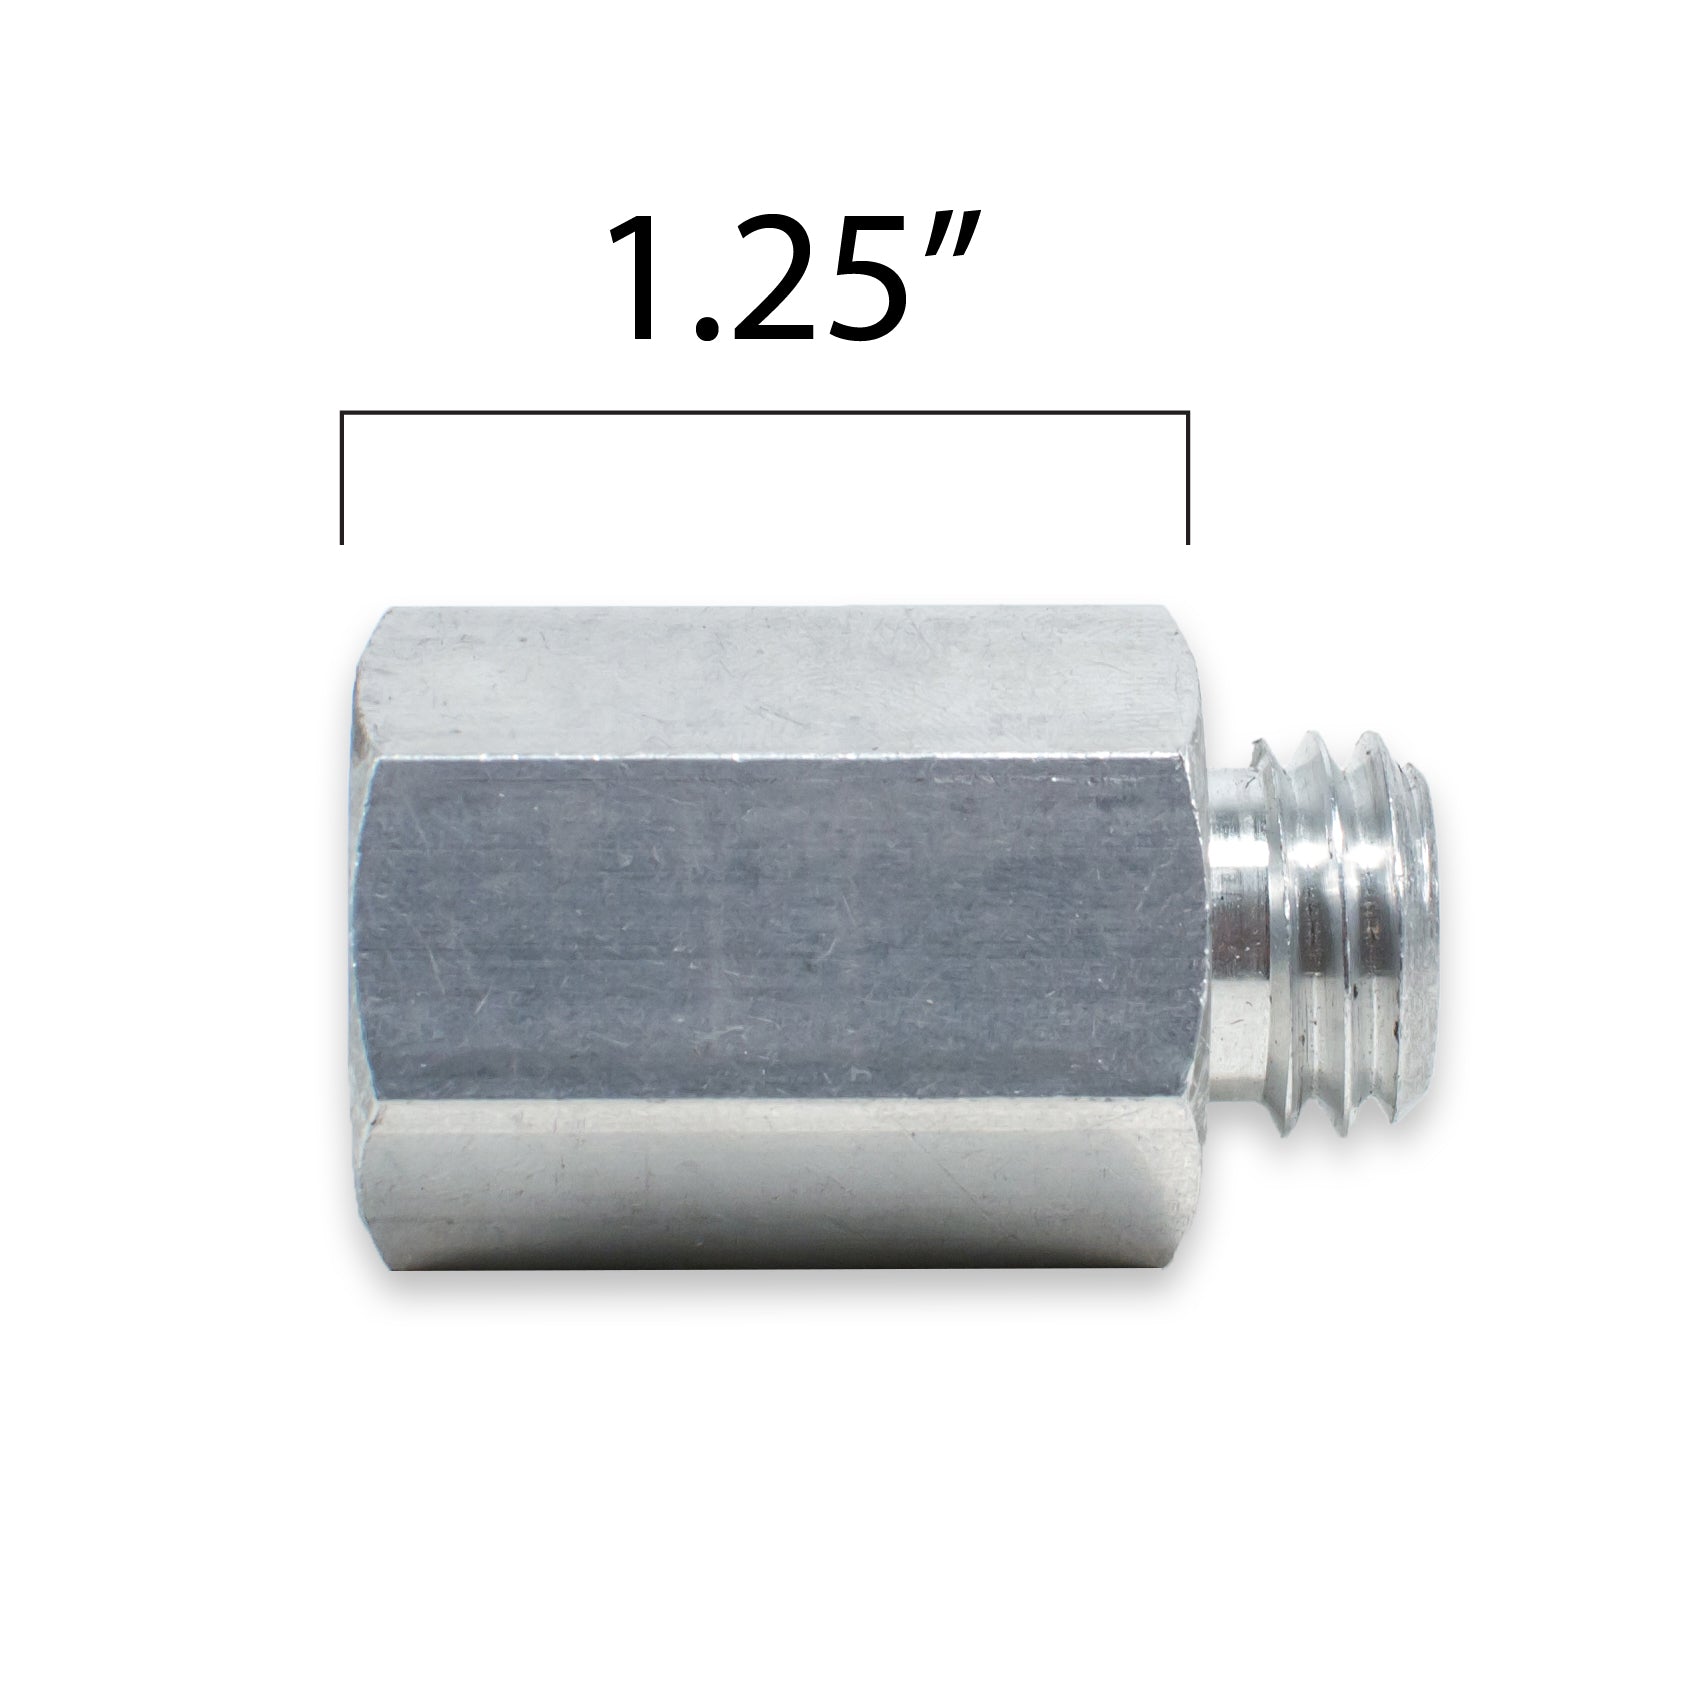 5/8"-11 Extender Bolt Adapter for Buffers/Polishers and Double Sided Wool Pads - Tool Guy Republic